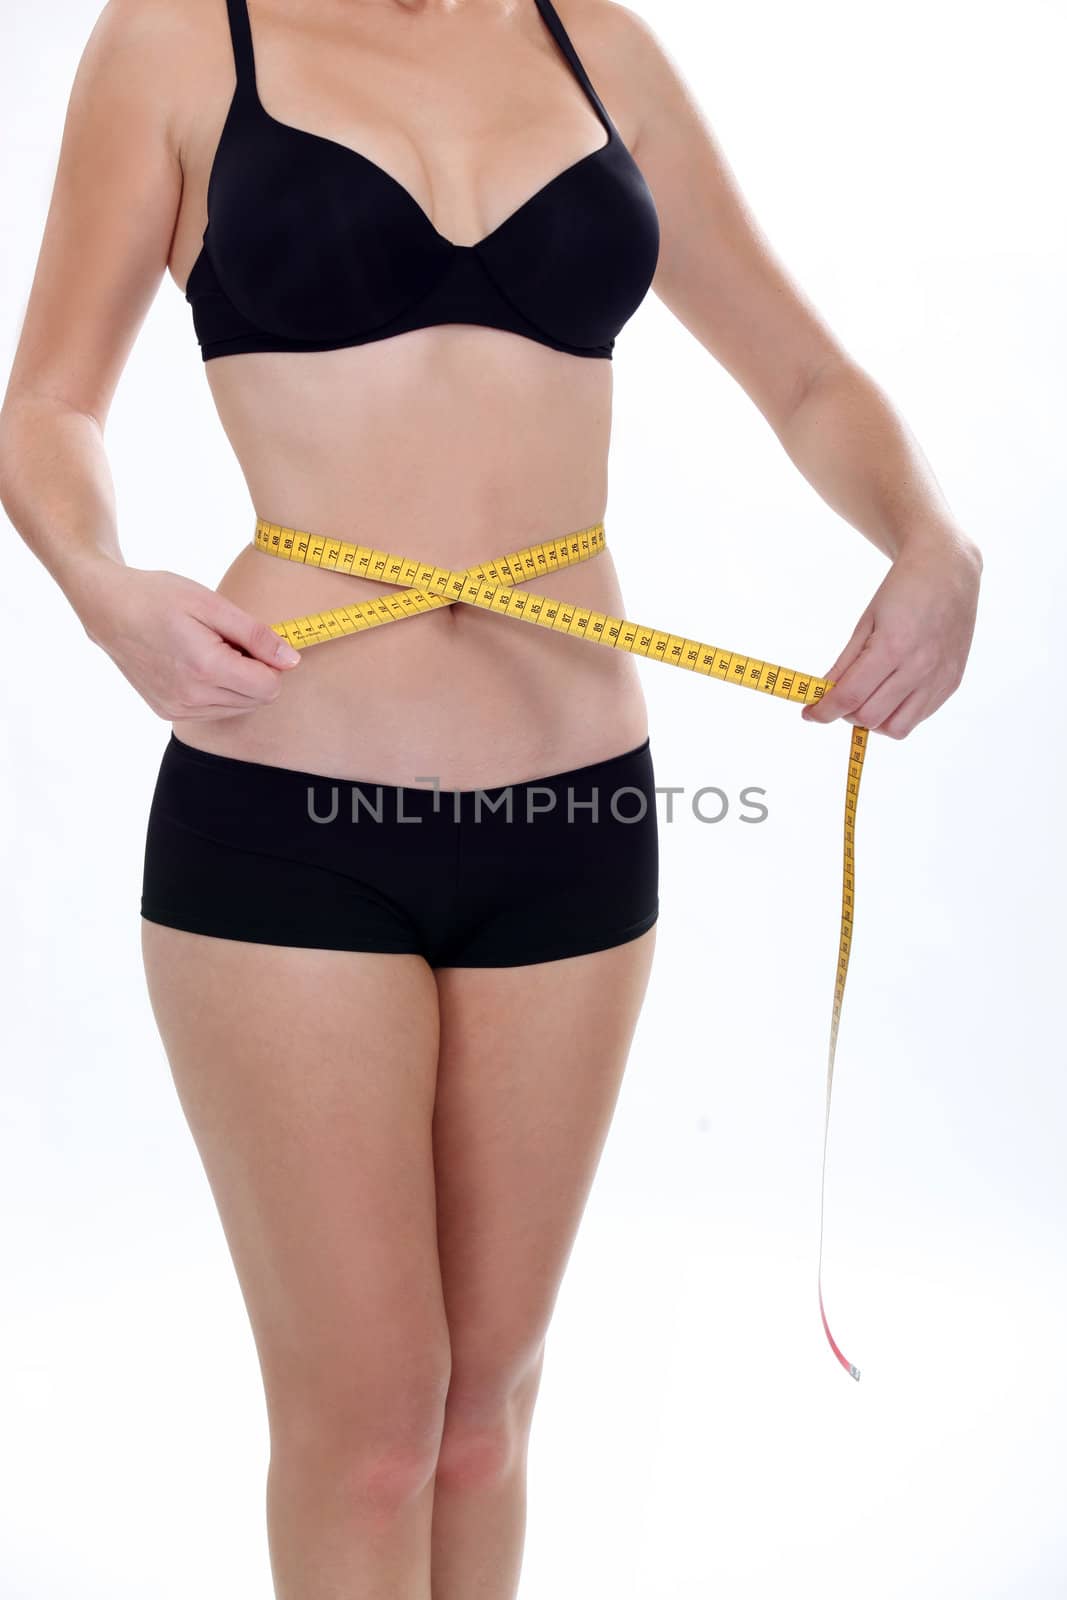 Woman measuring her waistband by phovoir